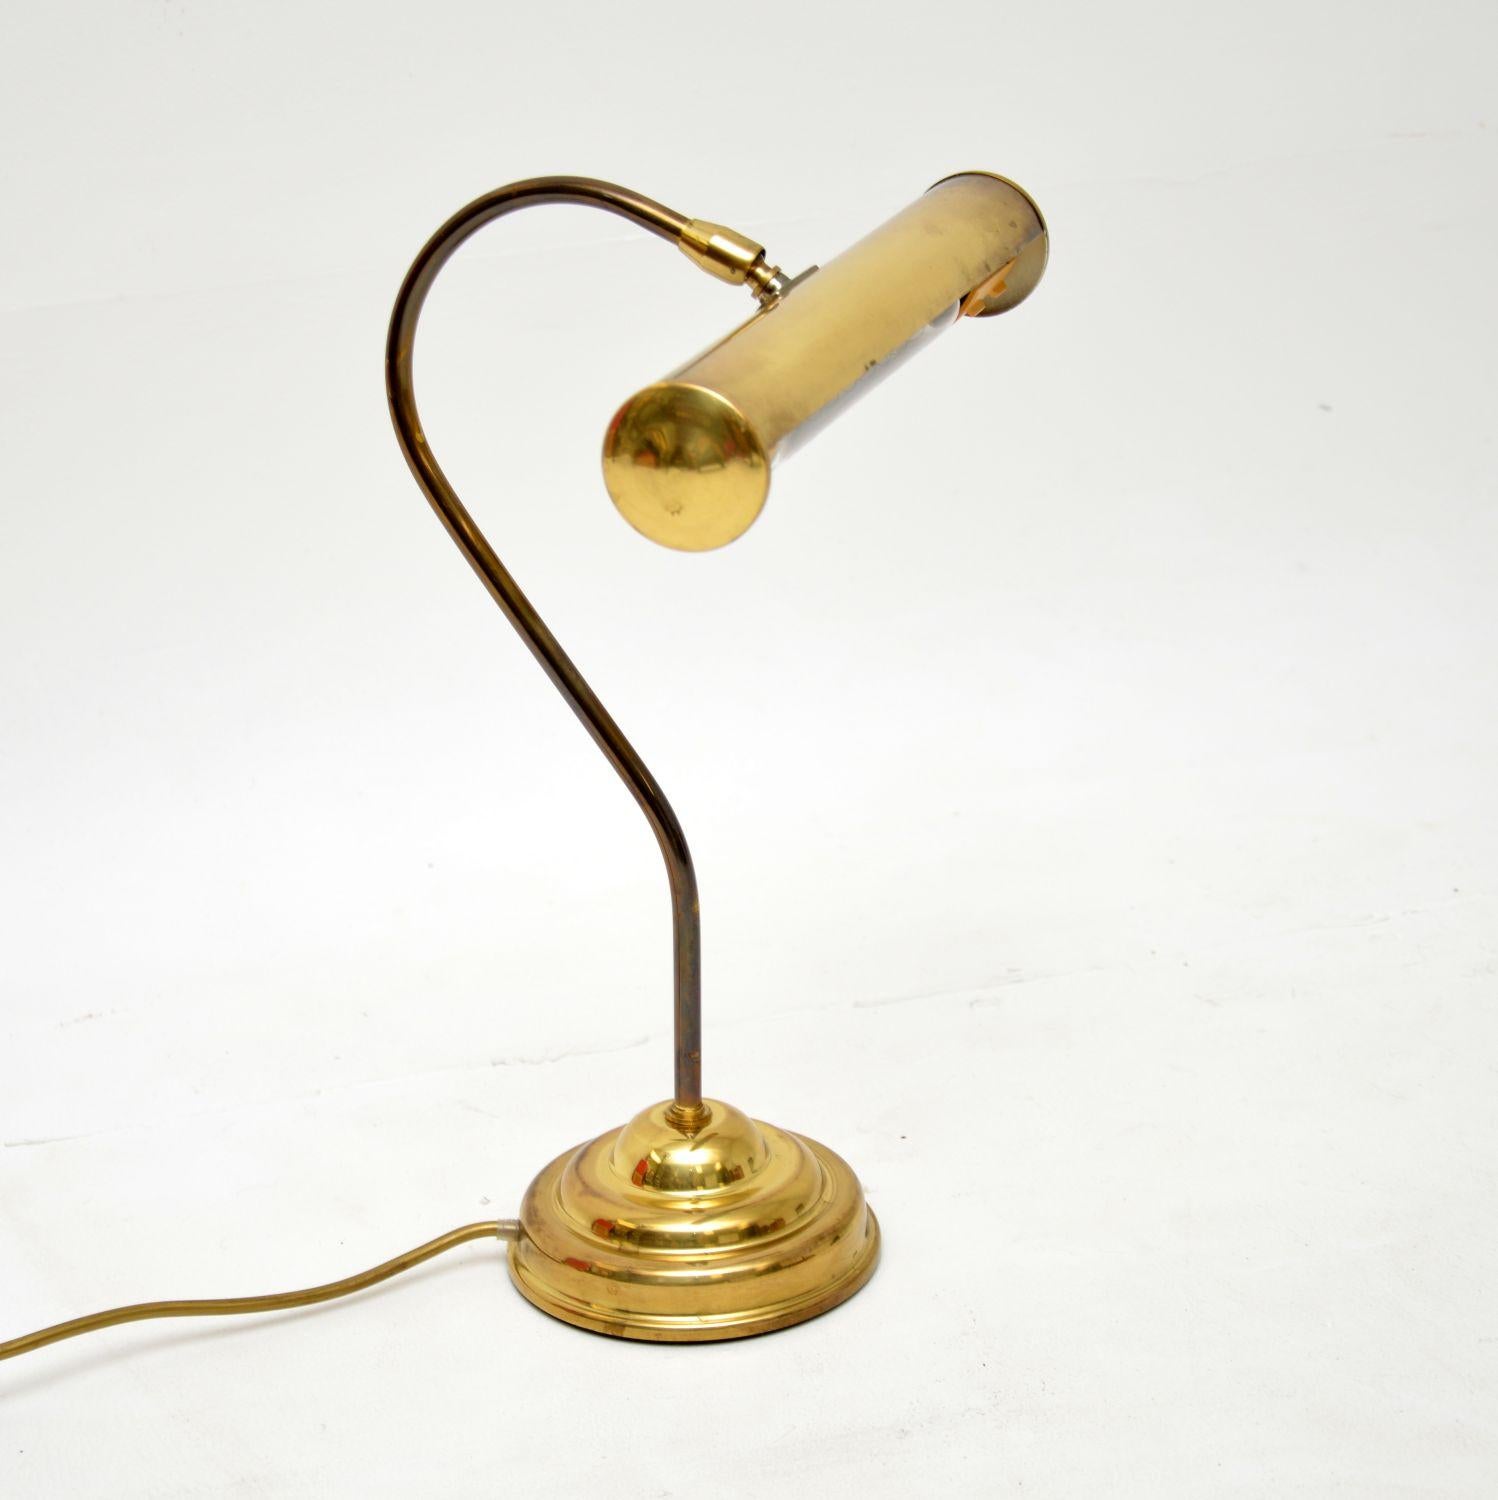 A fabulous vintage brass desk lamp, this was made in England, and dates from the 1950-60’s.

It is very well made with a lovely design. The elongated shade can tilt and swivel to adjust the angle of light.

The quality is excellent and this is